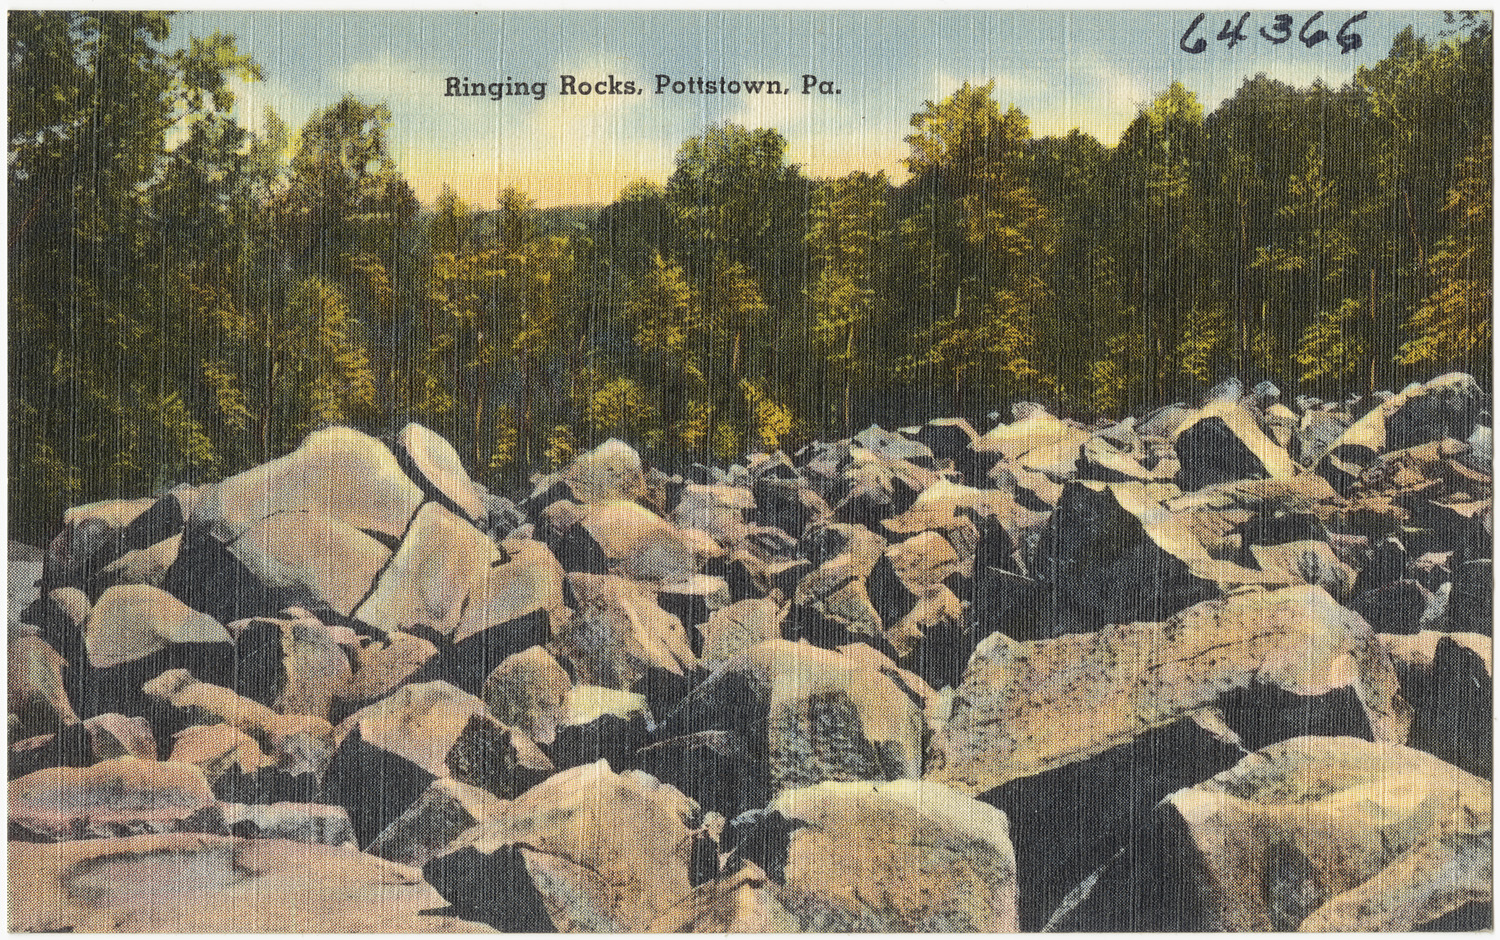 the pograph shows rocks in the riverbed